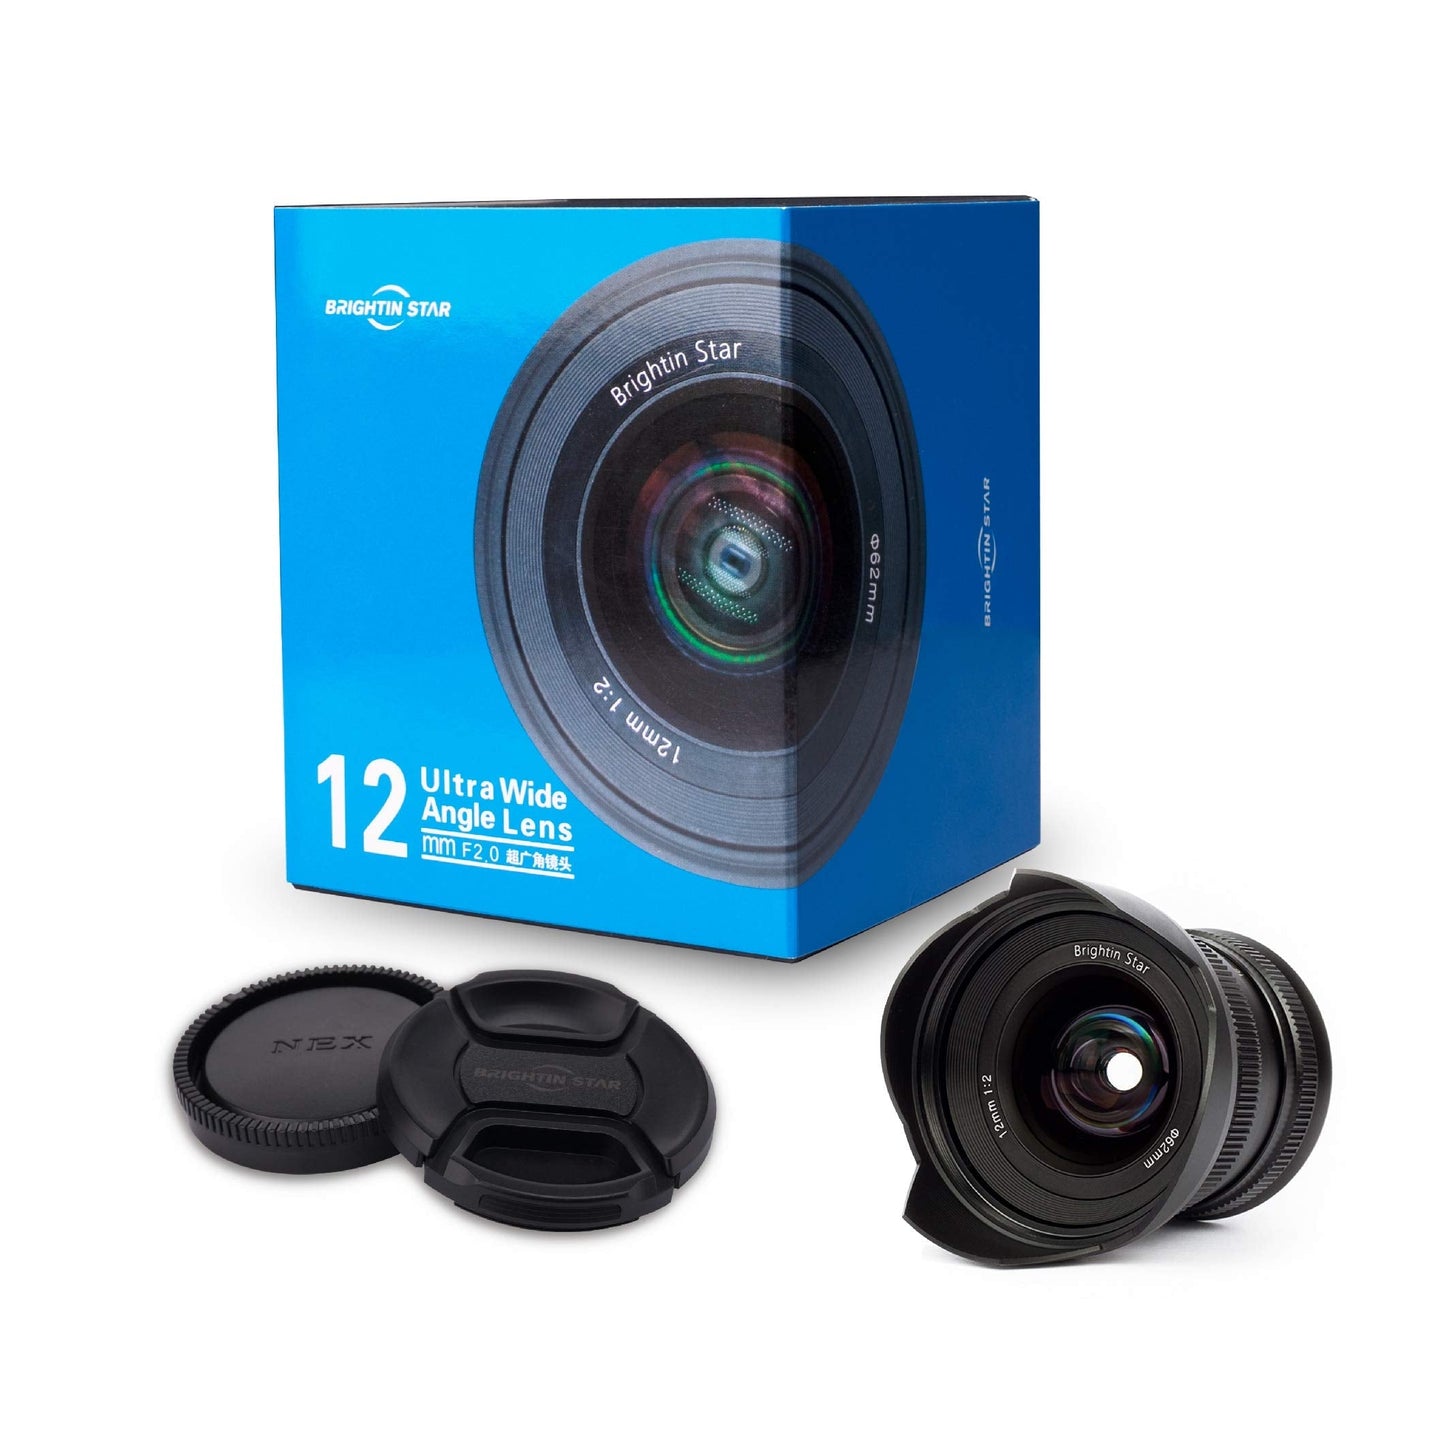 12mm F2.0 Ultra Wide-Angle Big Aperture APS-C Manual Focus Mirrorless Cameras Lens, Fit for Canon EOS-M Mount